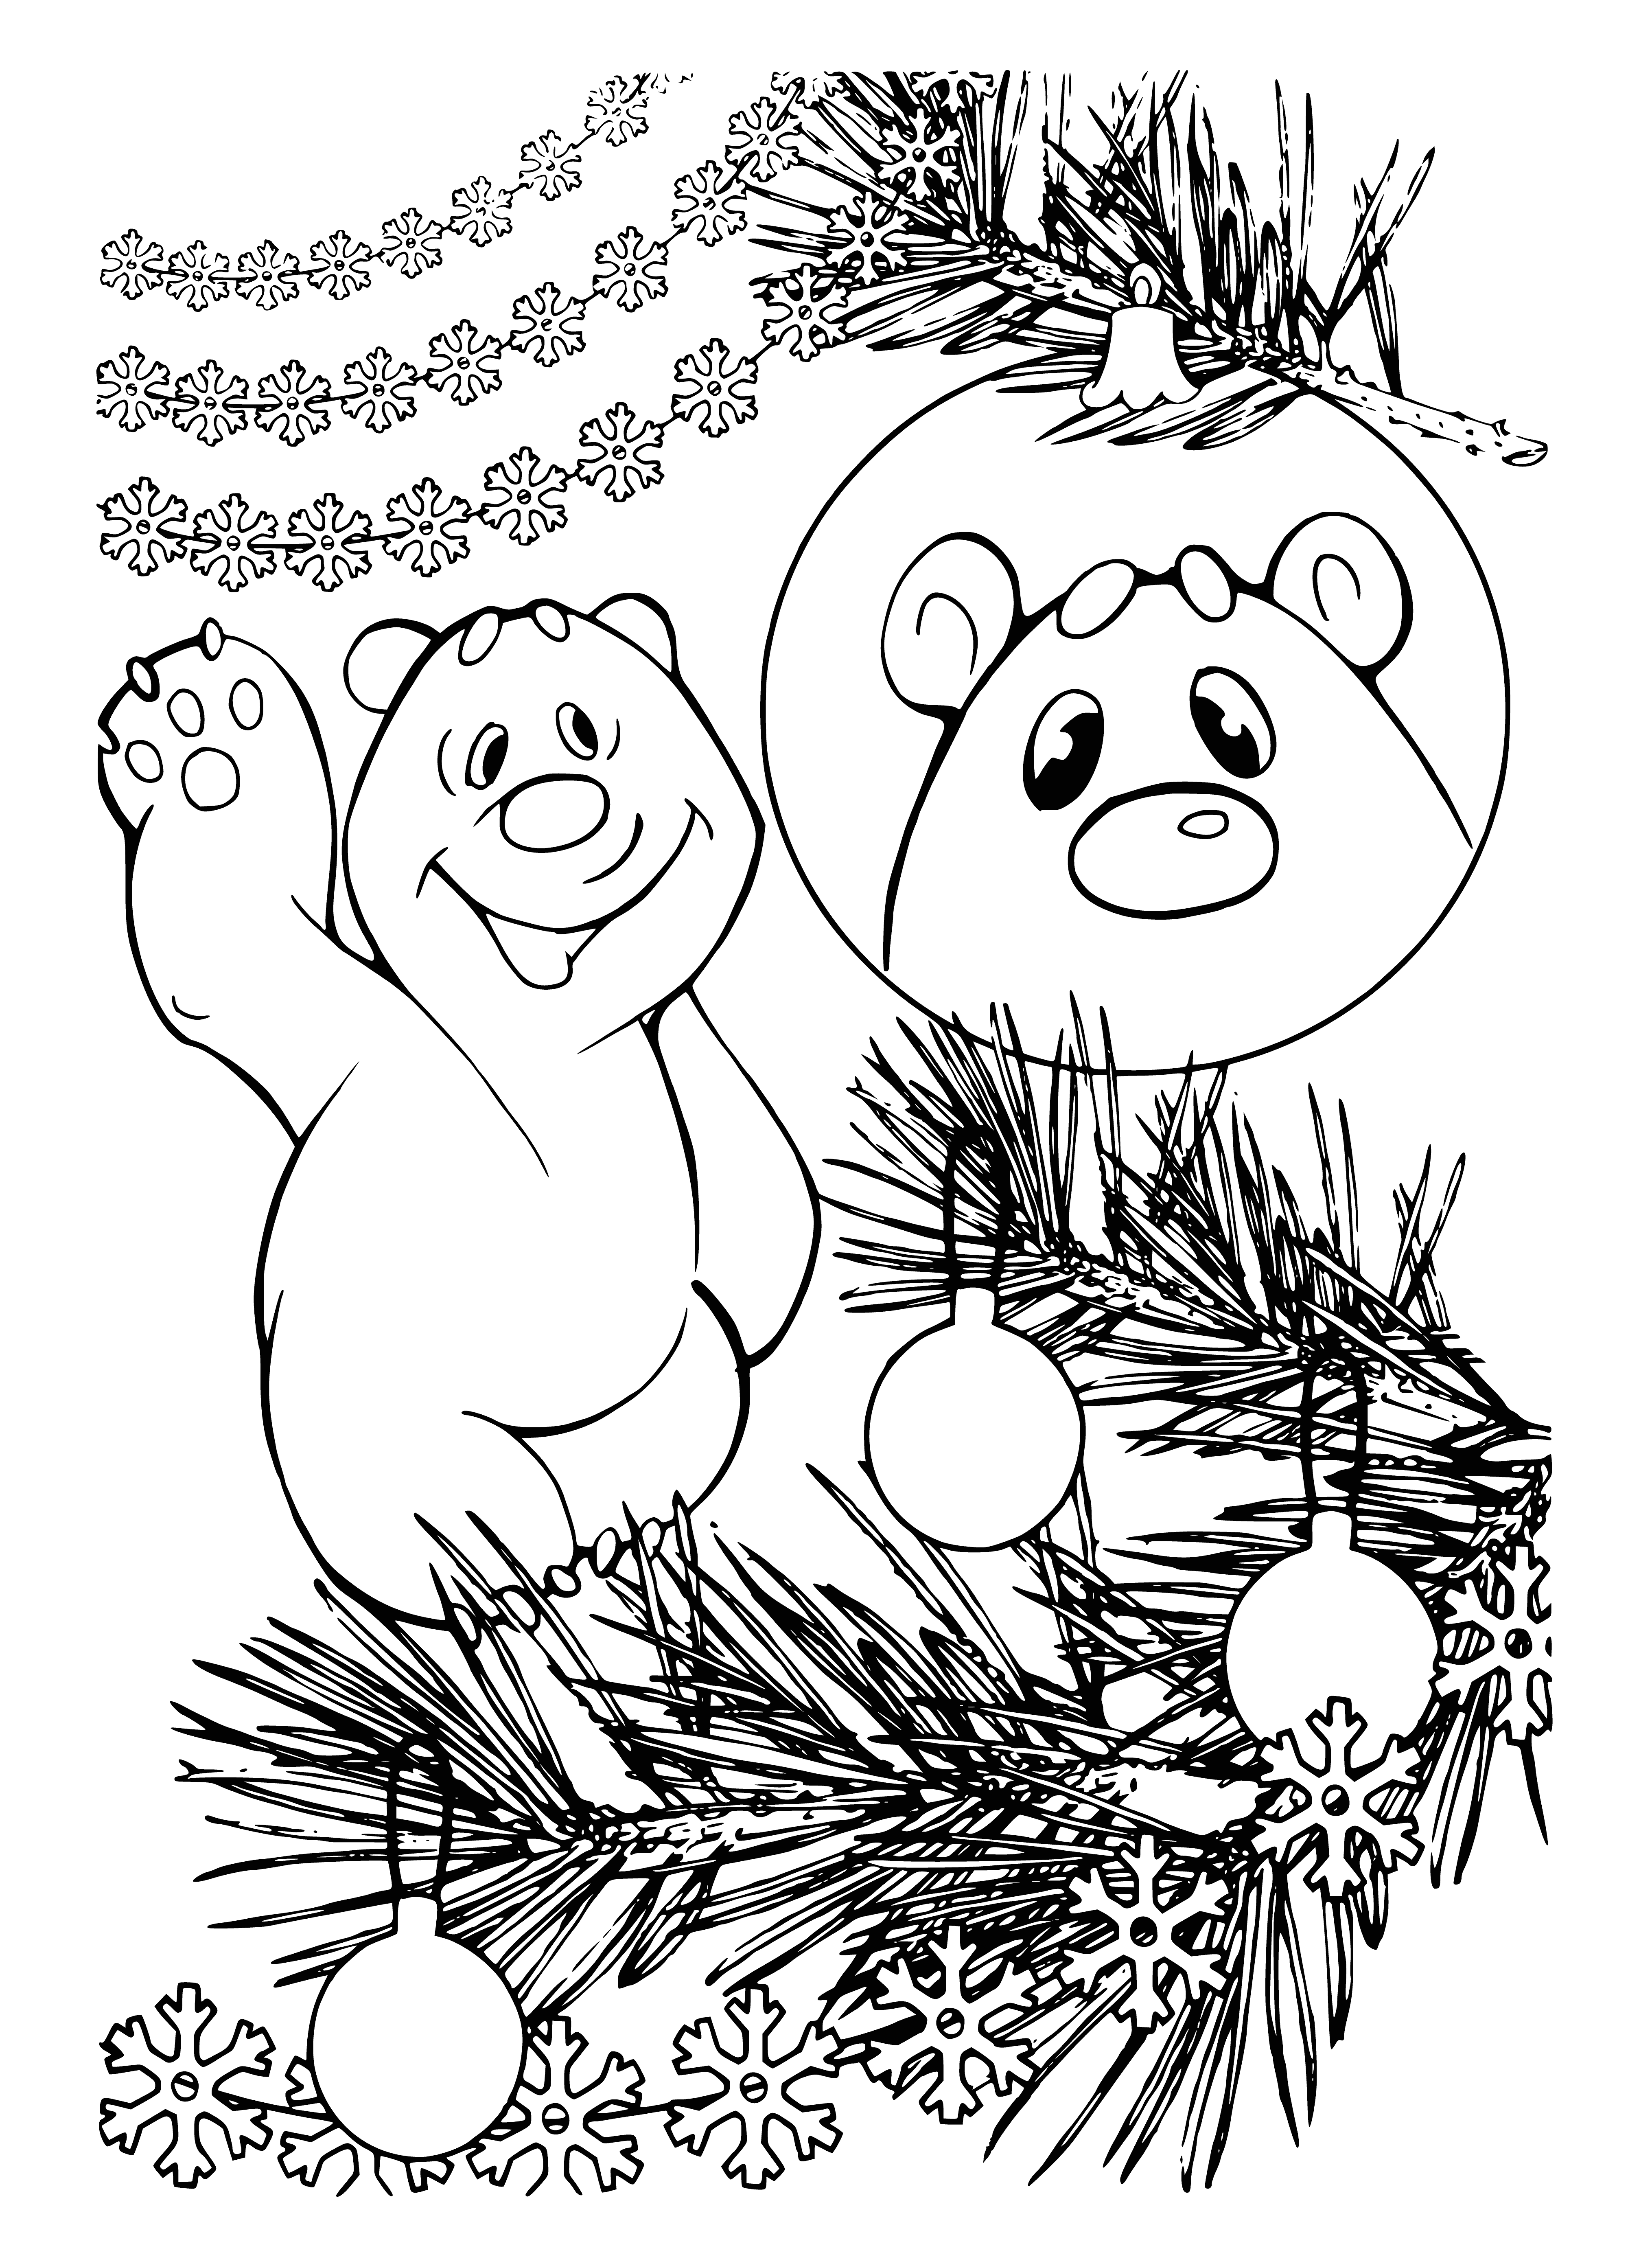 coloring page: Umka is a small, happy pup enjoying the sunny day by a tree, ears perked up and tongue out!